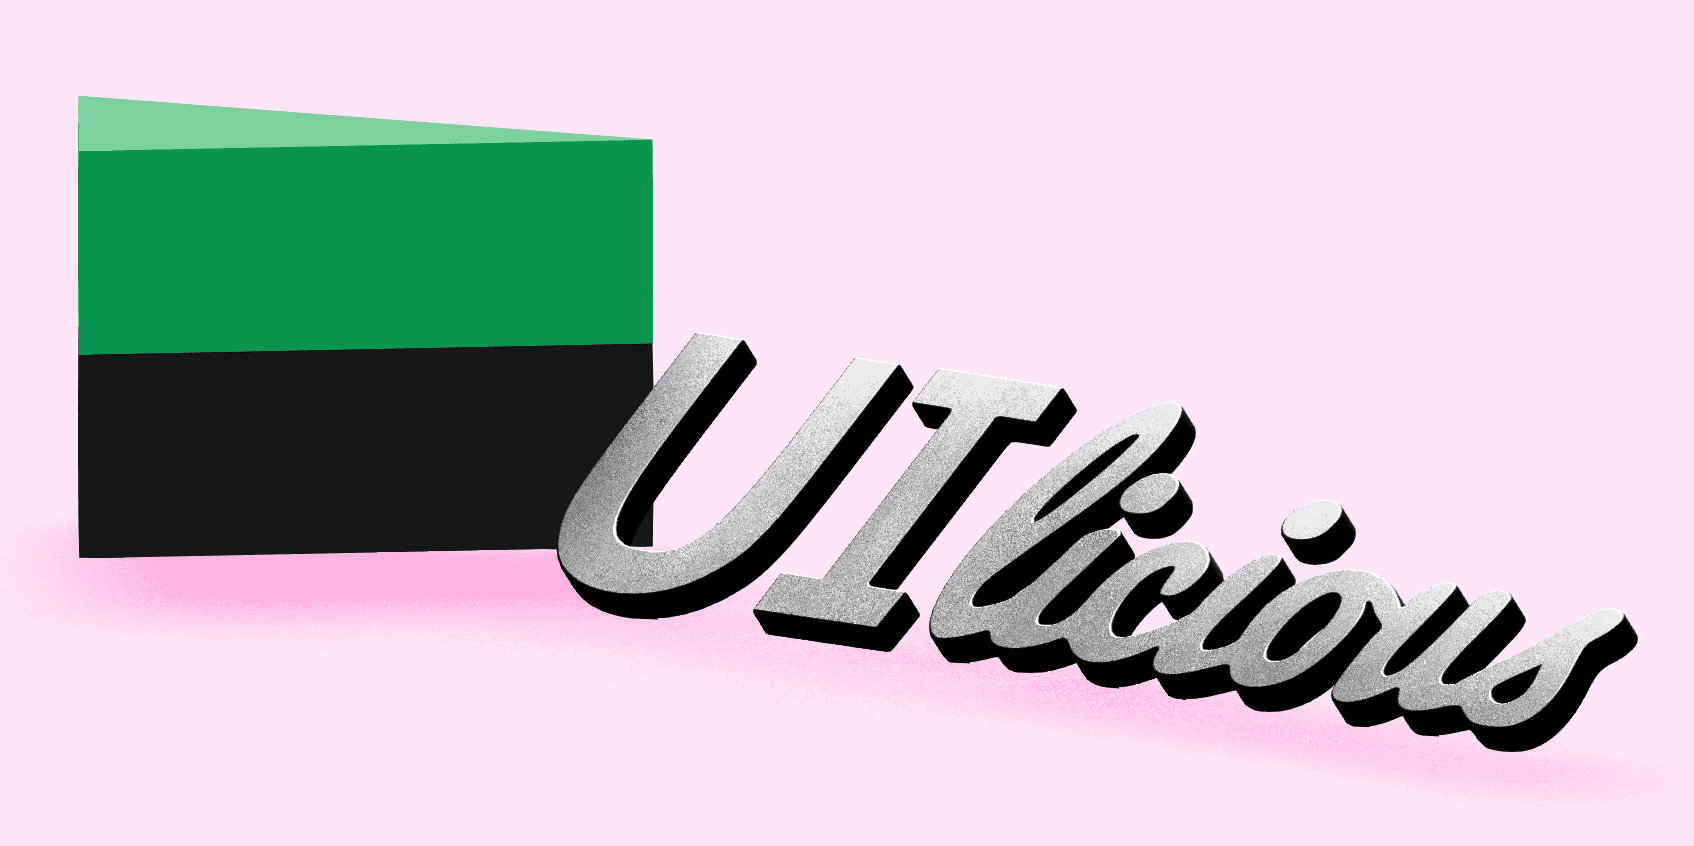 UI-licious logo in 3D, tilted view